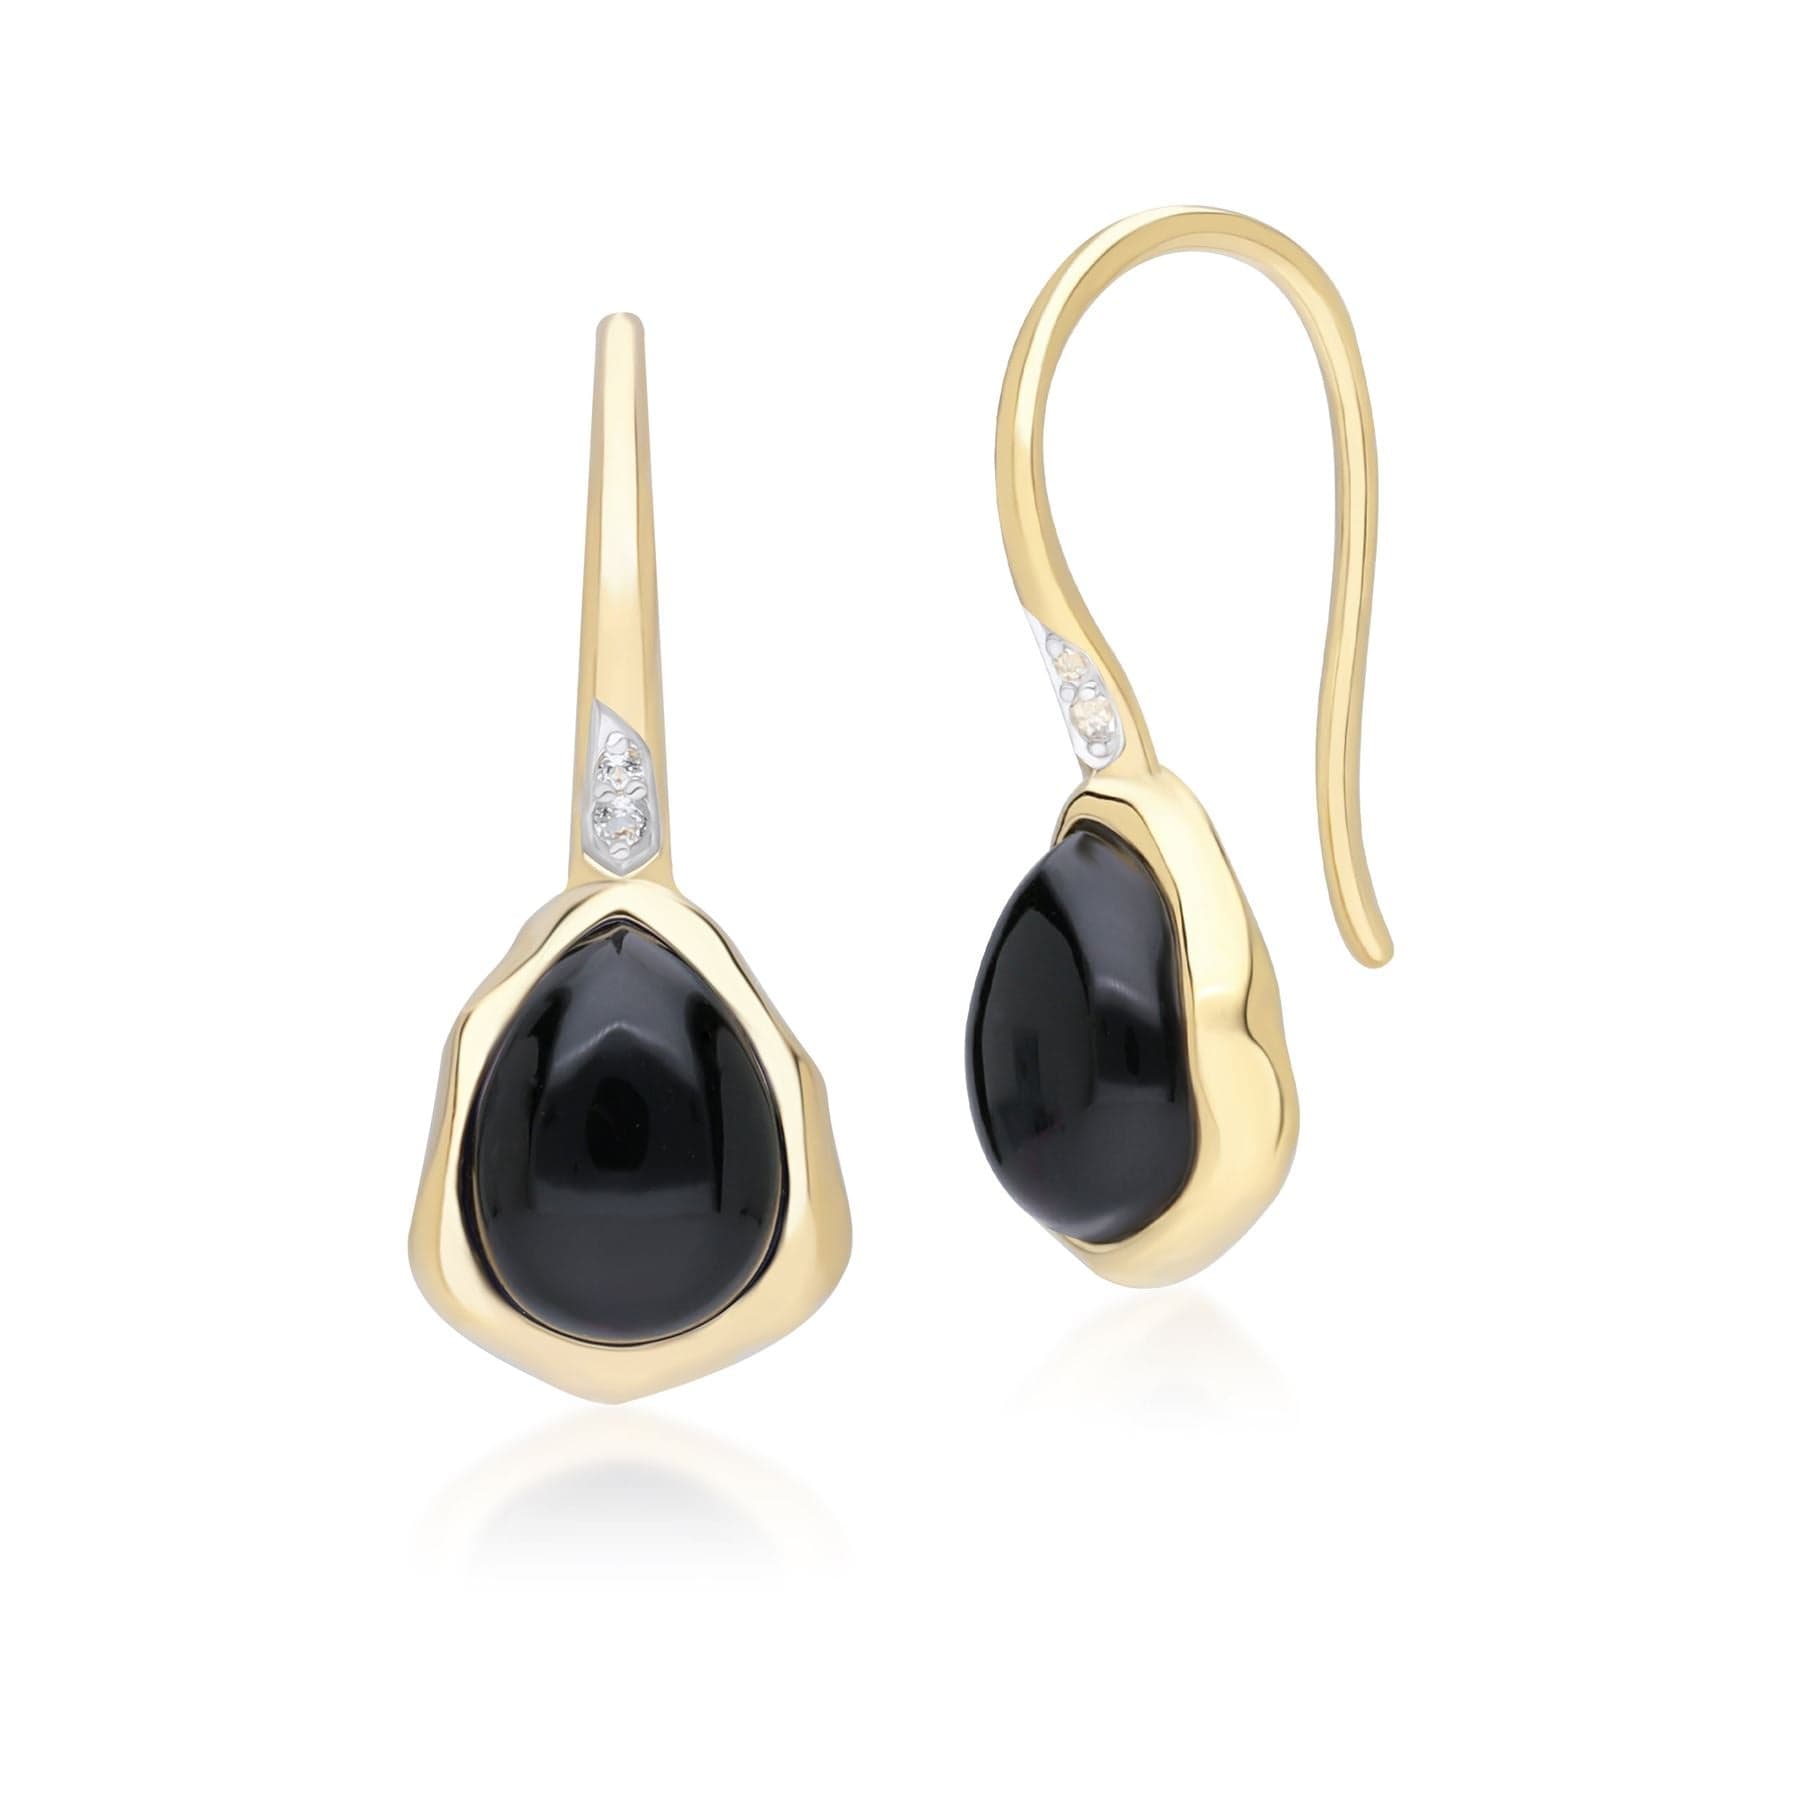 253E418703925 Irregular Black Onyx & Topaz  Drop Earrings In 18ct Gold Plated SterlIng Silver Front